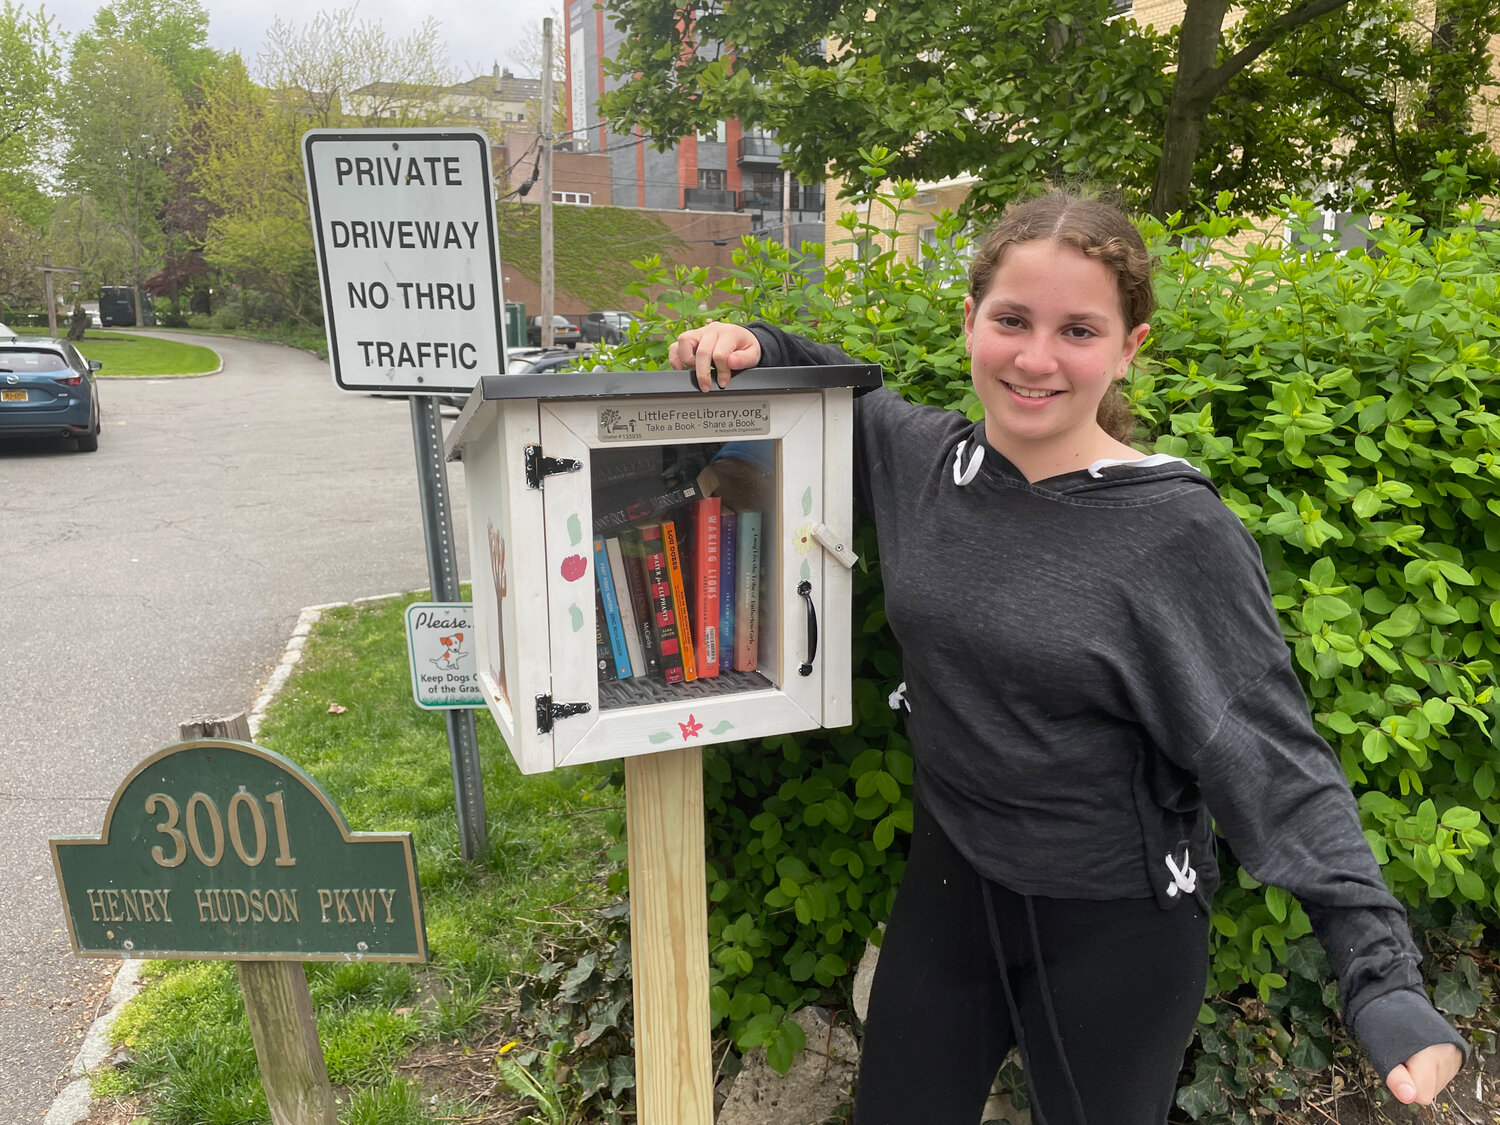 Sigal Teten stands next to her Little Free Library organized by for her Bat Mitzvah project last October. This little library is one of approximately three in Riverdale. Teten painted the box herself, which is at 3001 Henry Hudson Parkway.